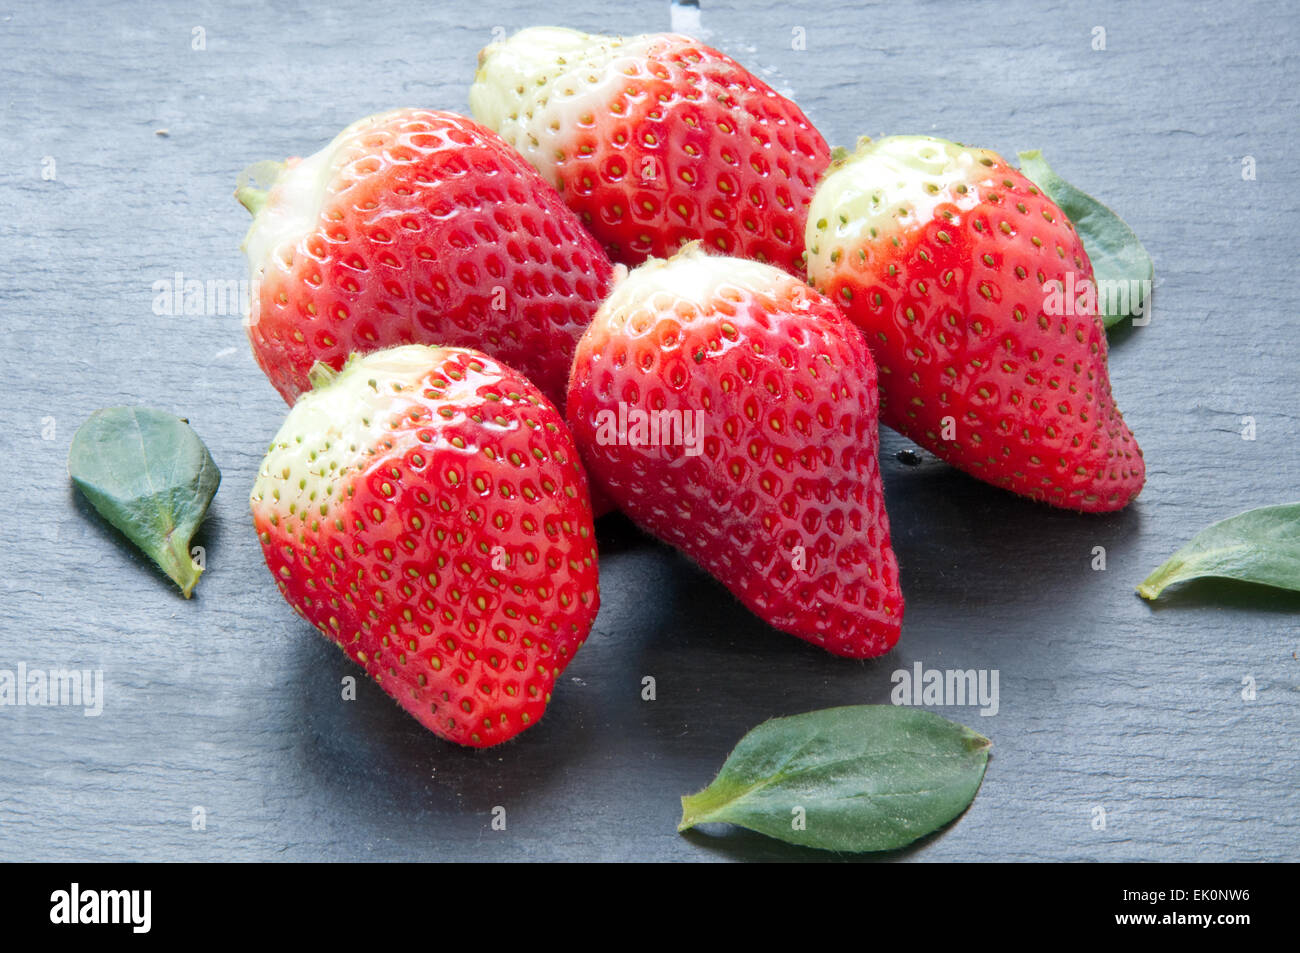 A group of red tasty fresh strawberries in season Stock Photo